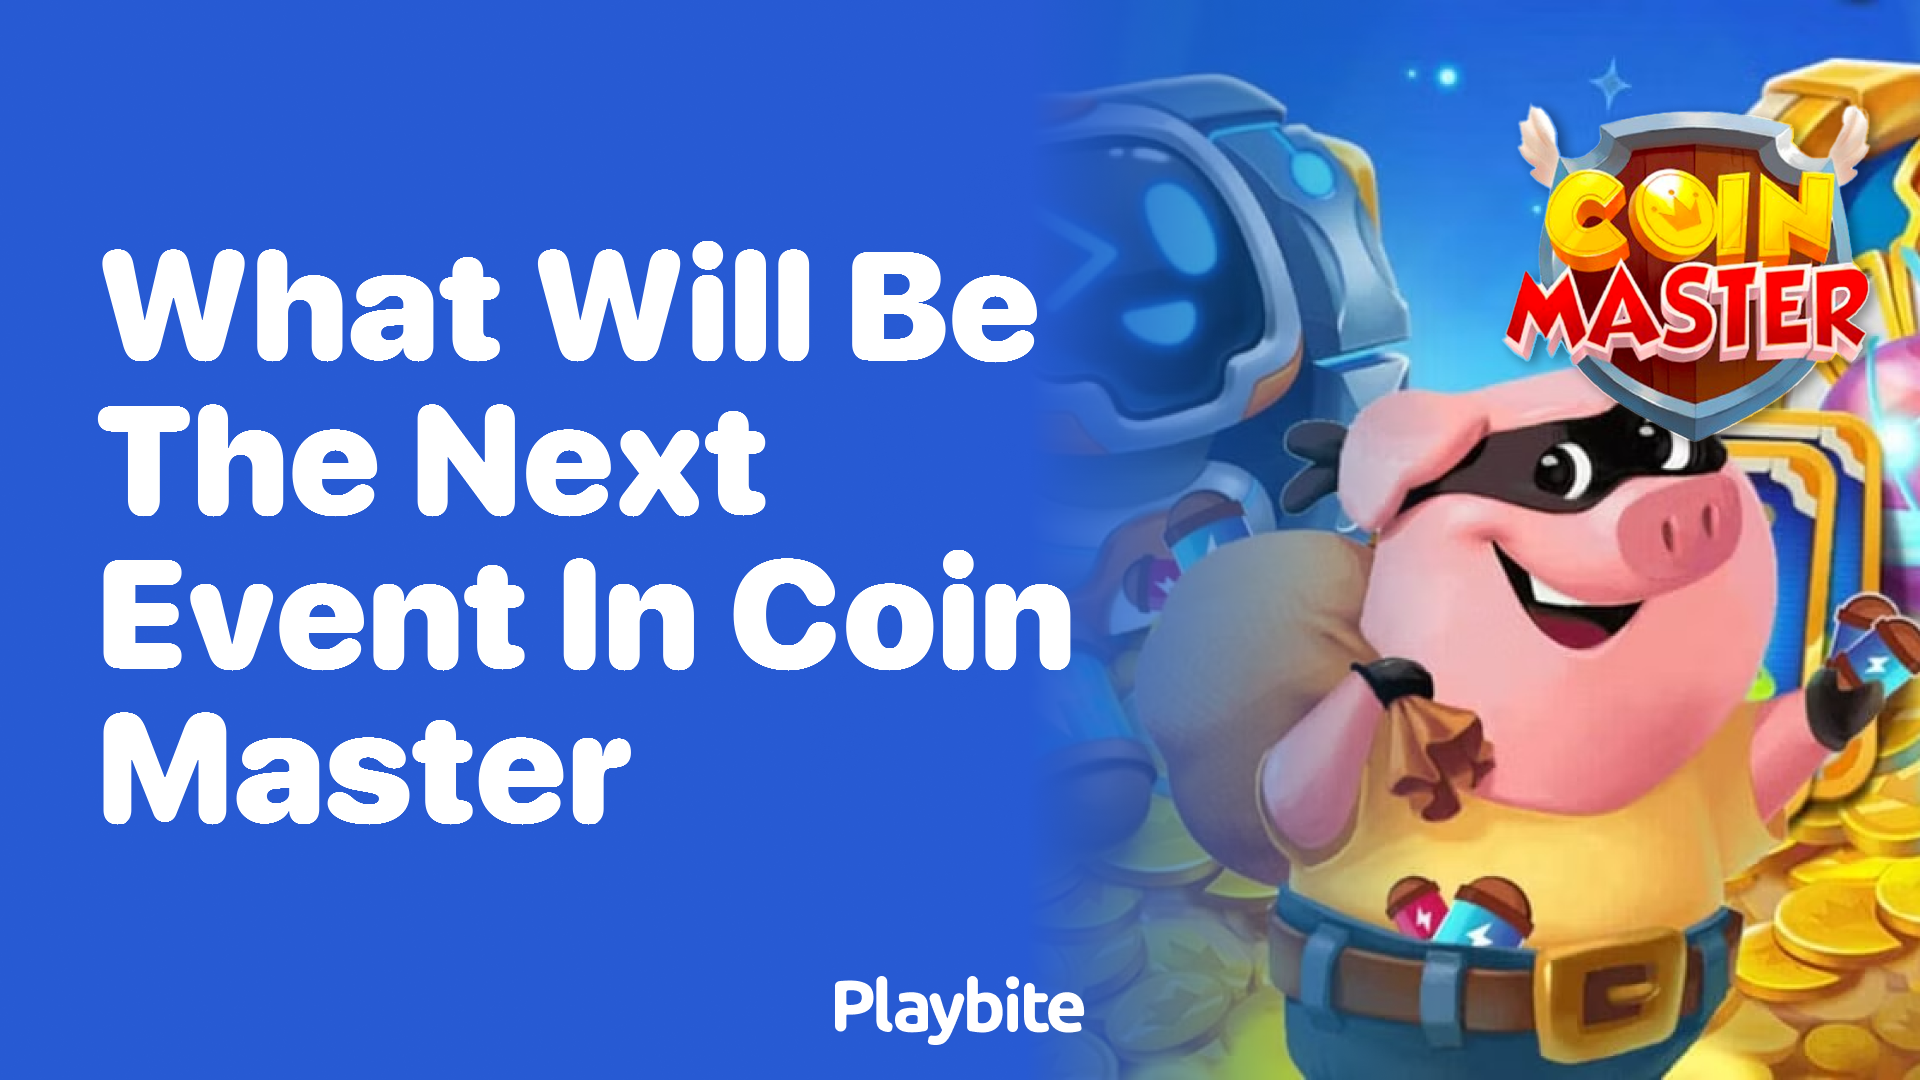 What Will Be the Next Event in Coin Master?